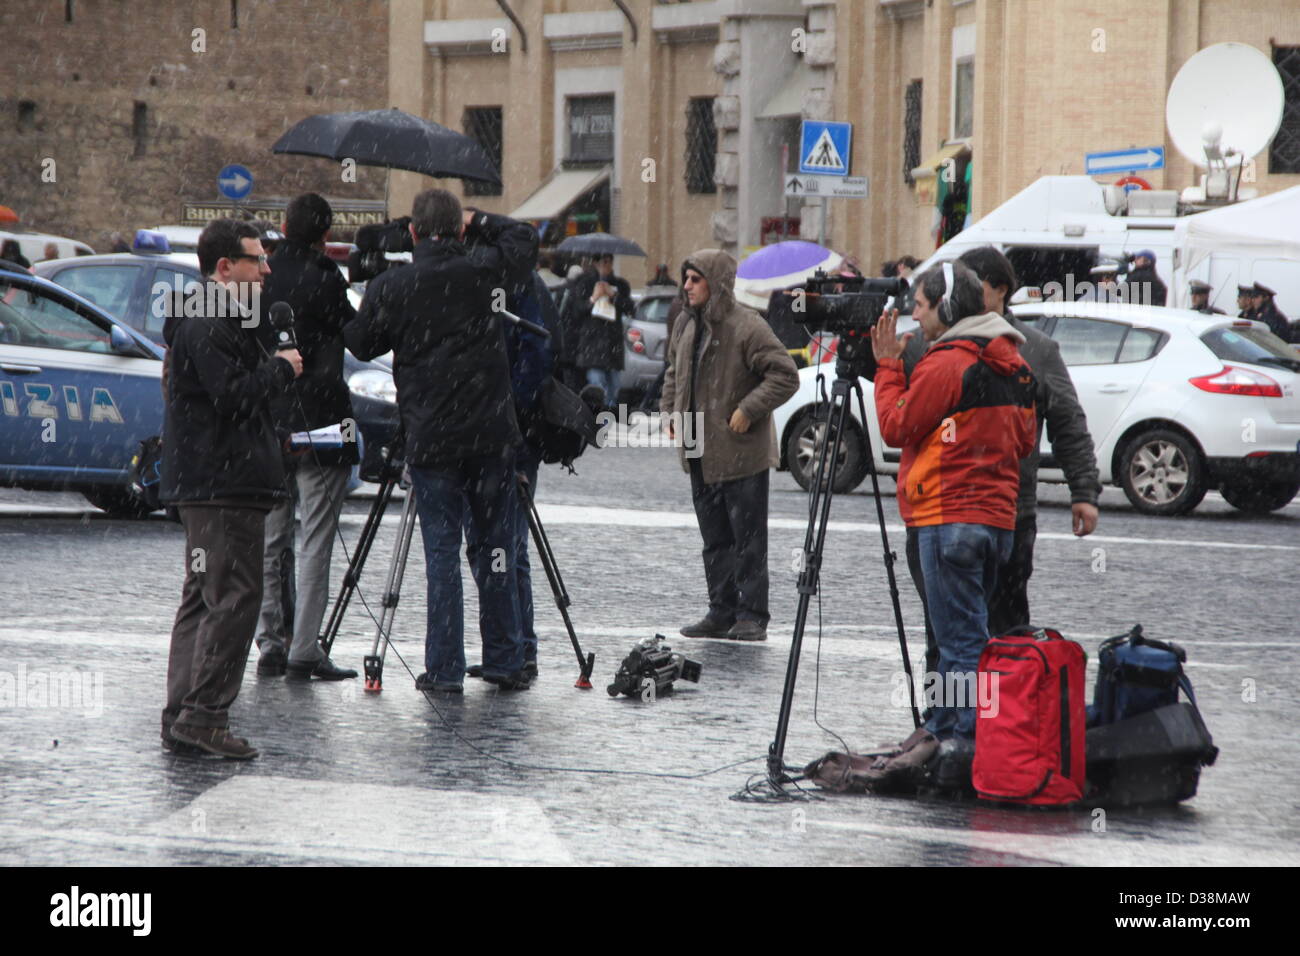 12 Feb 2013 The world's media at the Vatican City, Rome following the resignation announcement by Pope Benedict XVI. Stock Photo